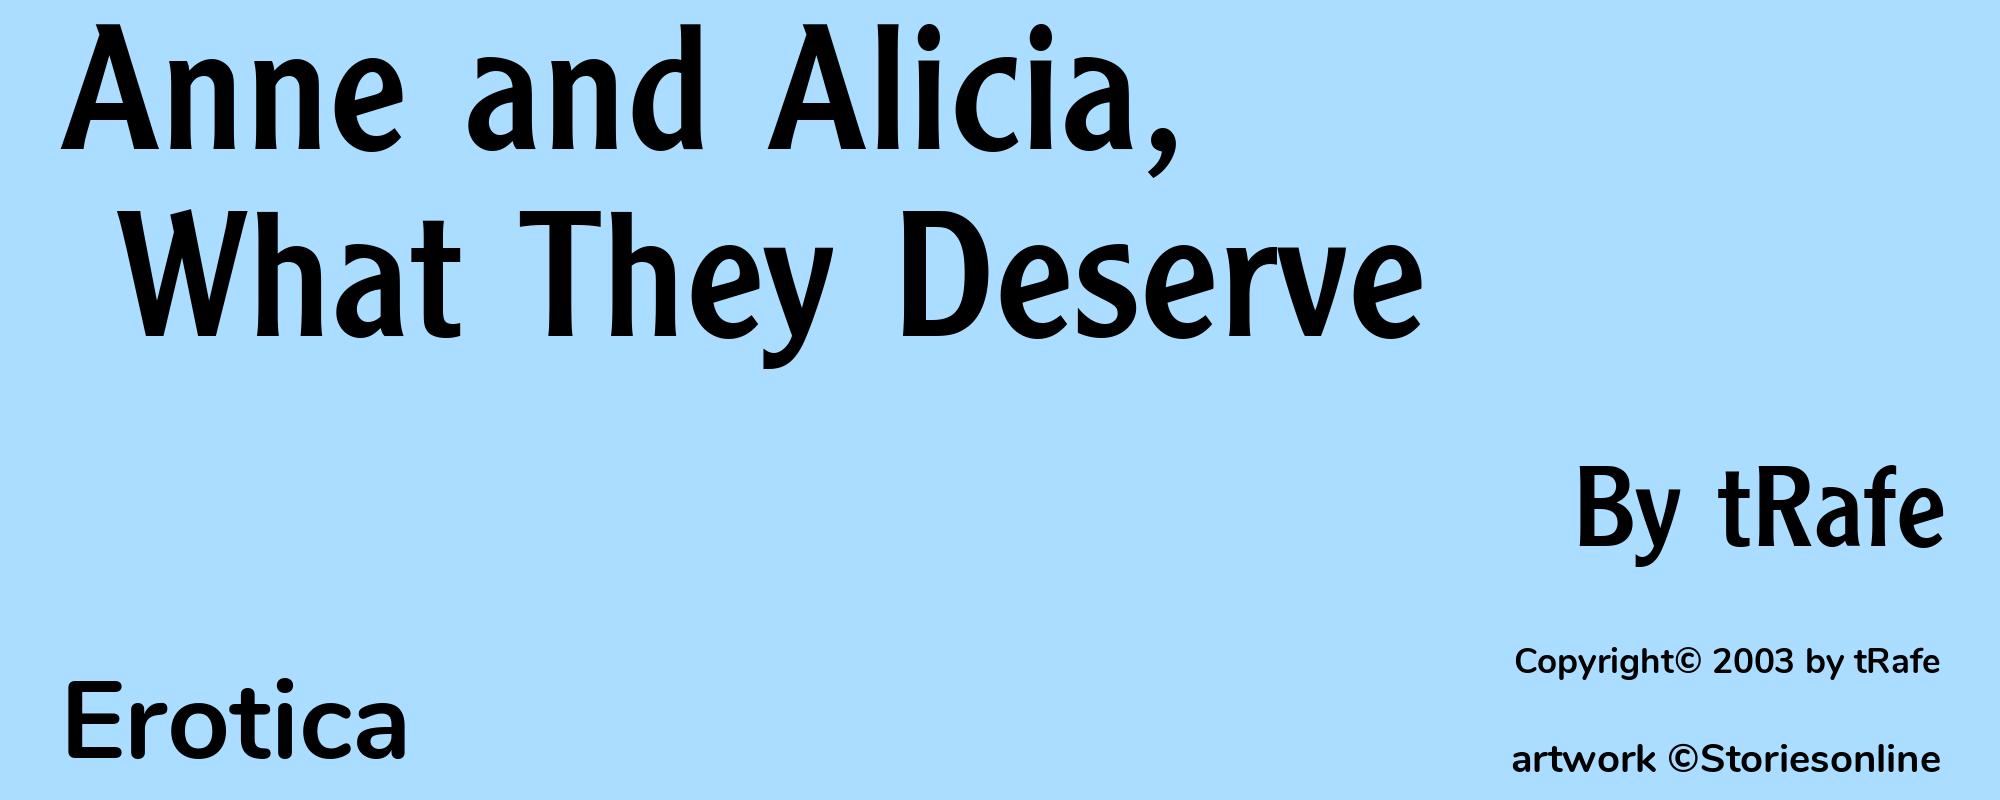 Anne and Alicia, What They Deserve - Cover